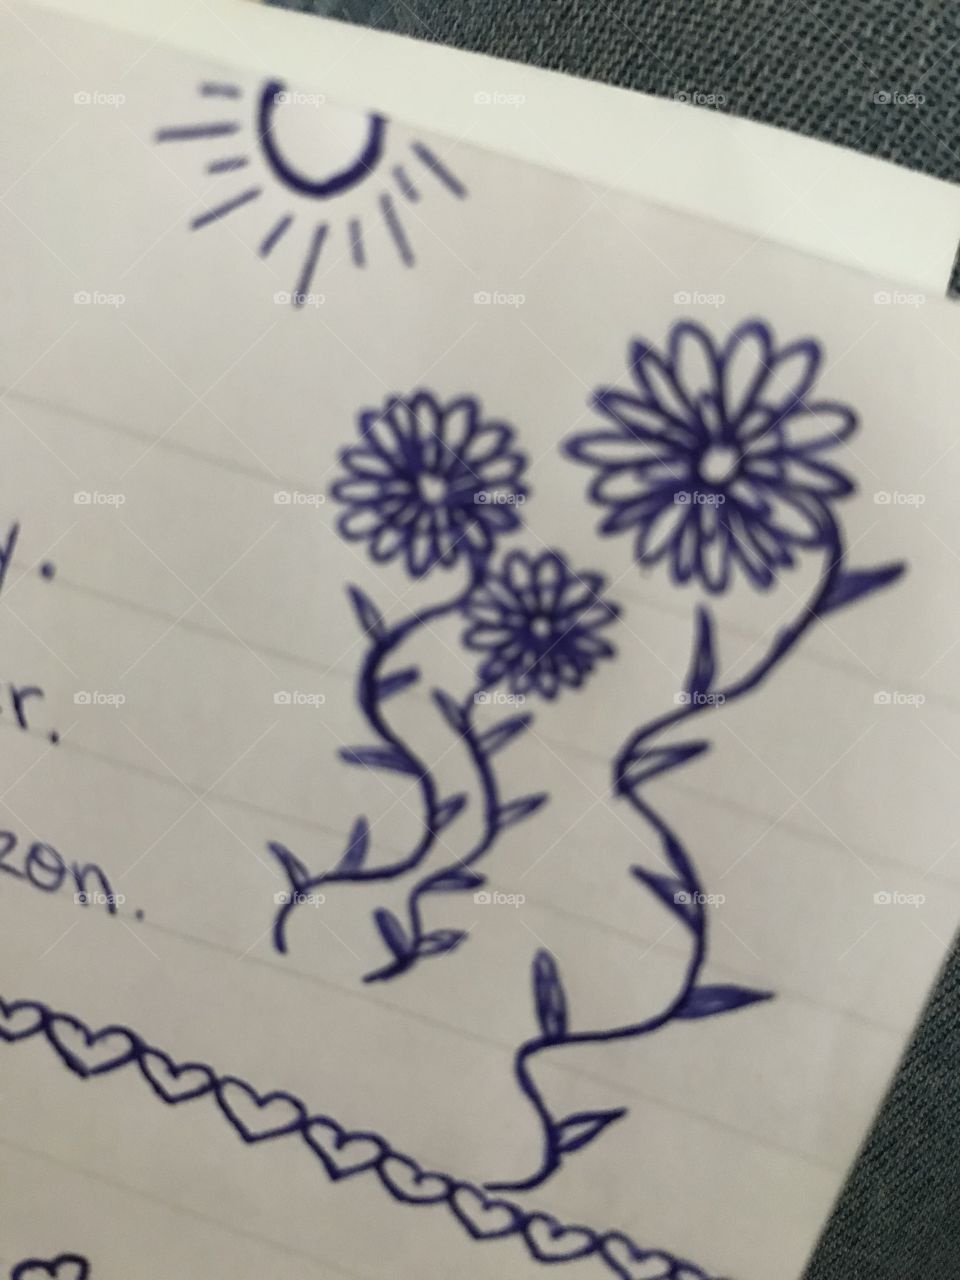 Flowers in my notebook.Drawing is the thing I like to do in my free time.I wish I could draw better,but everything that comes from the heart is a beautiful thing,isn‘t it? 